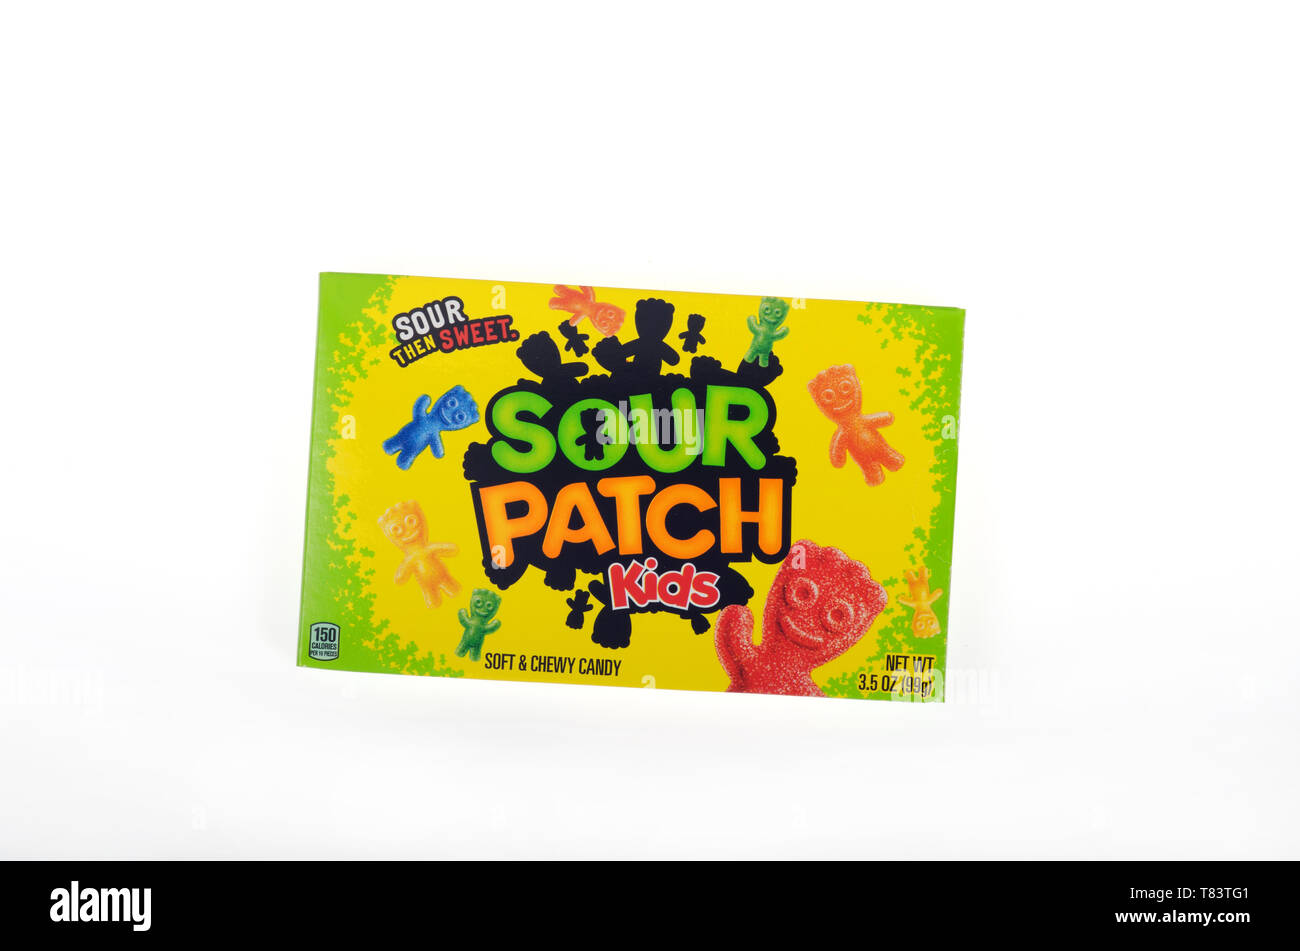 Sour Patch Kids box of candy Stock Photo